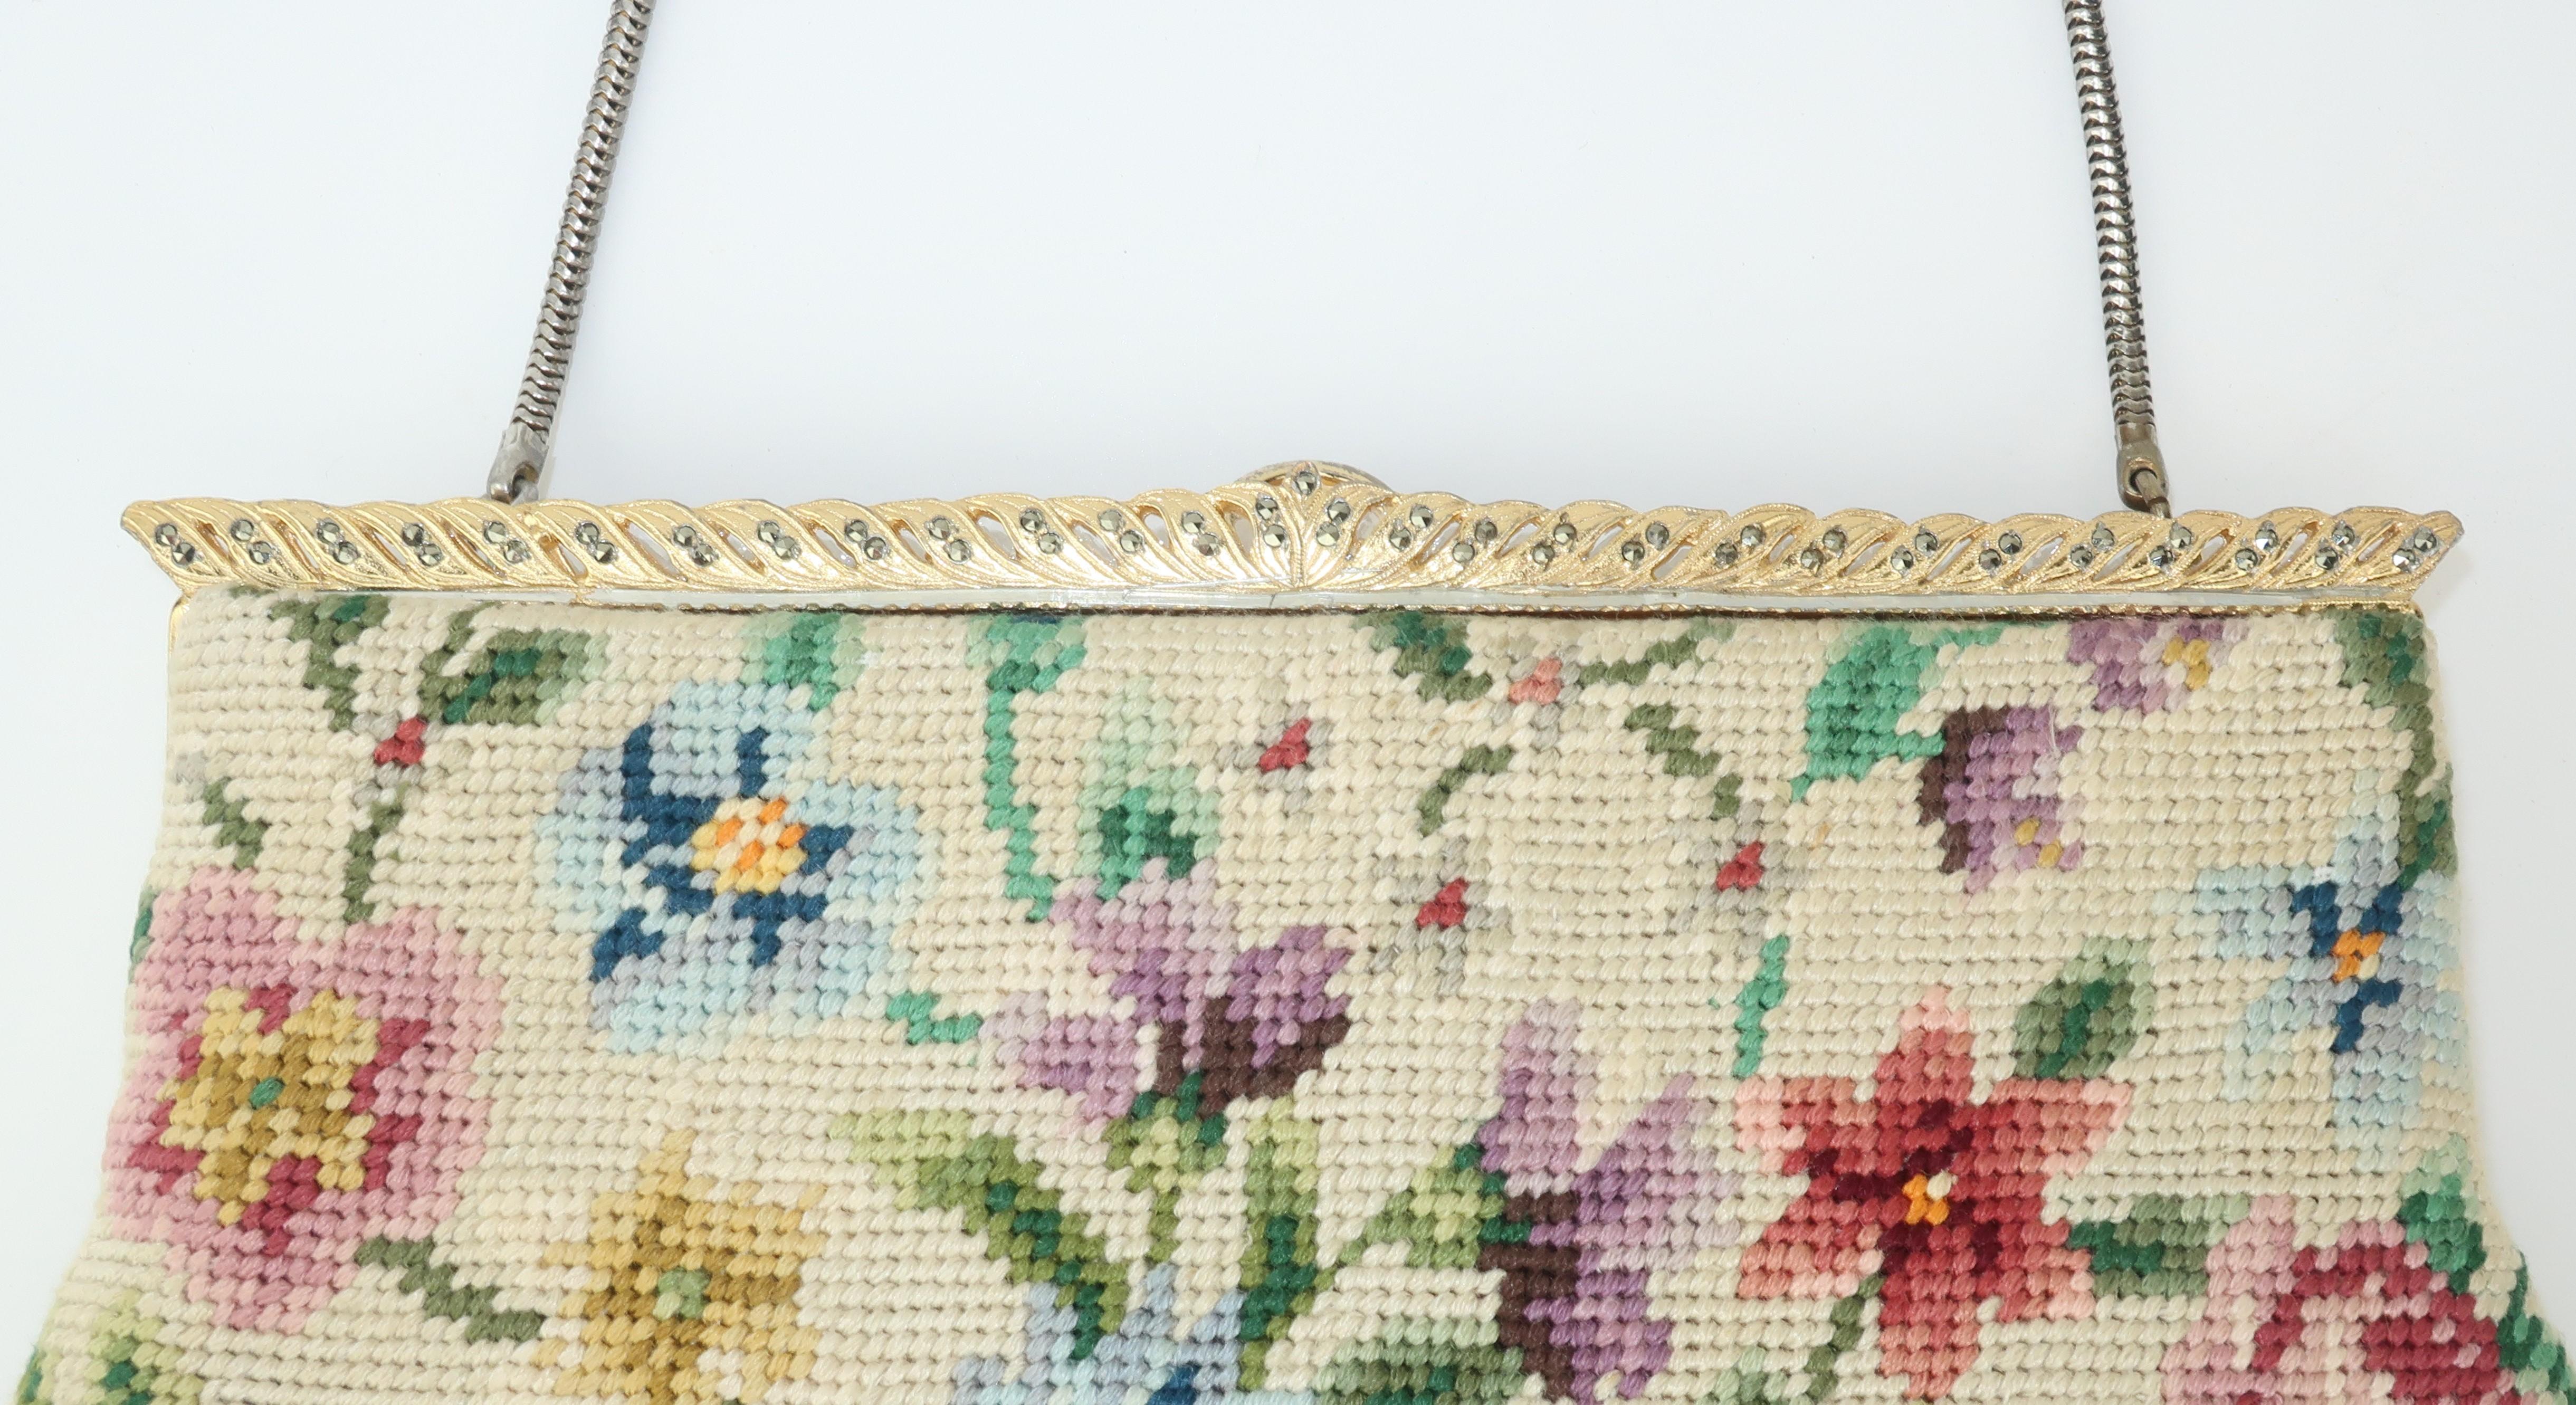 Beige Switkes Floral Needlepoint Handbag With Decorated Frame, C.1950